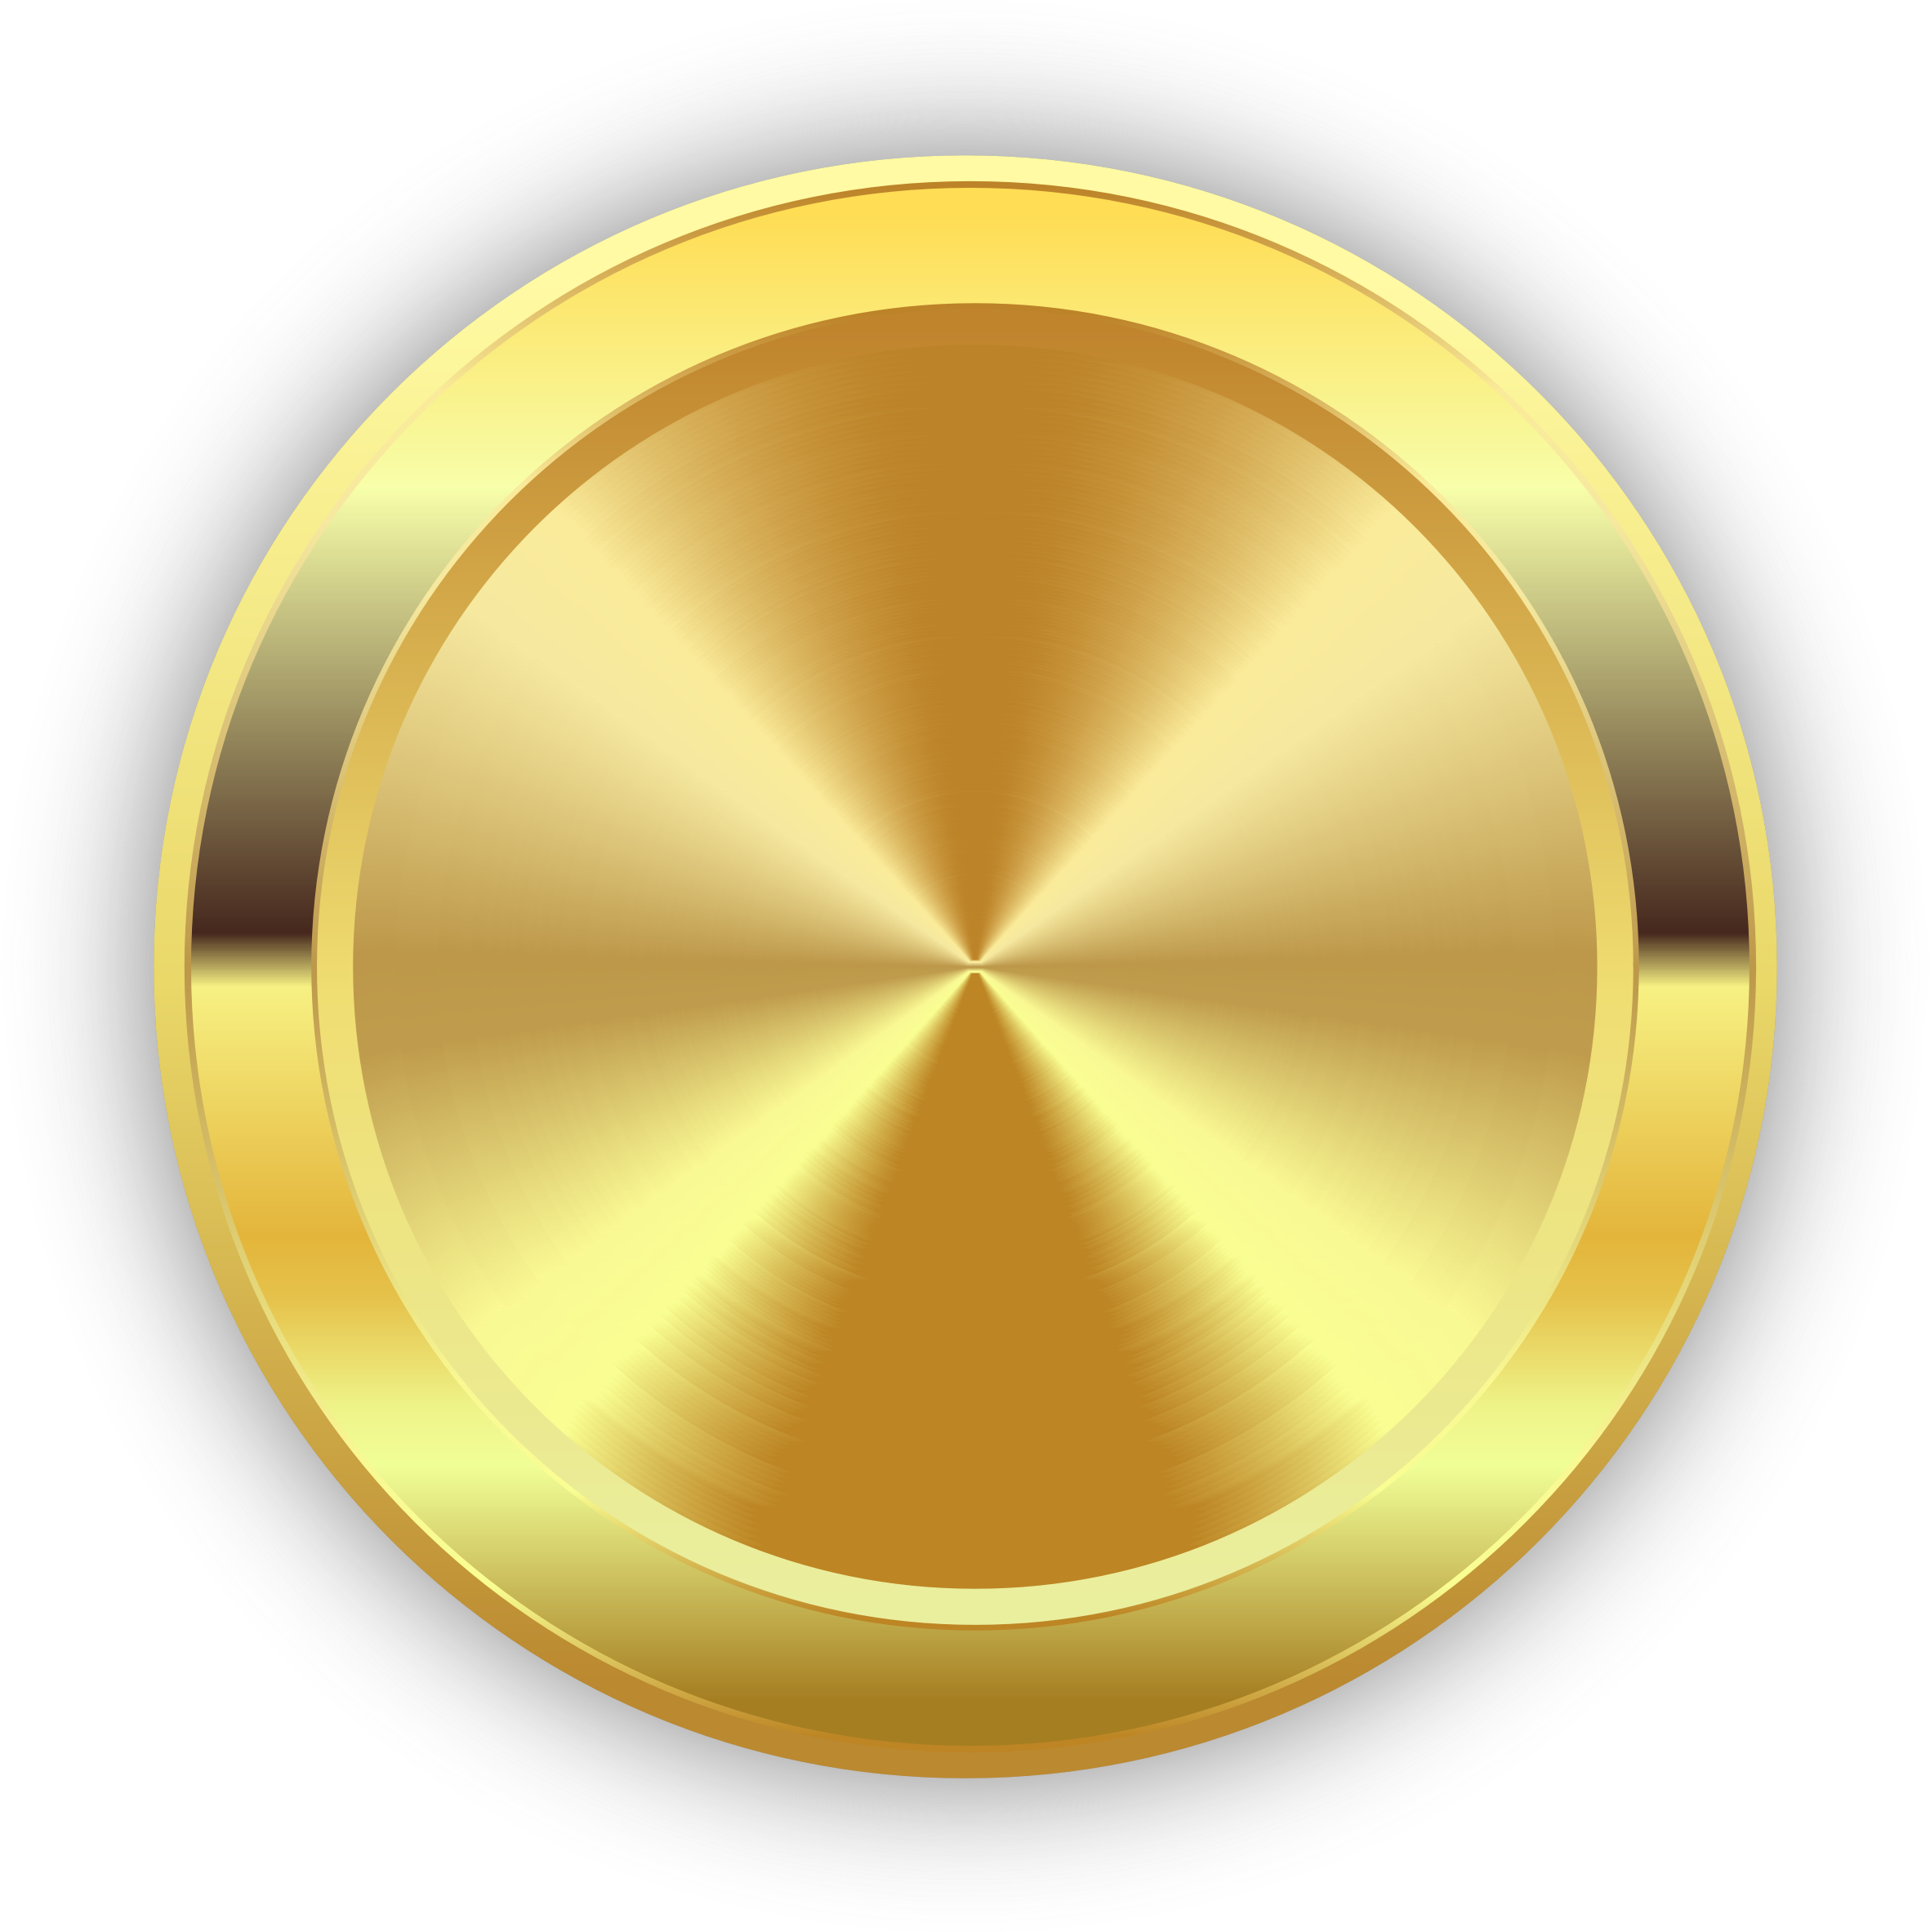 Download This Free Icons Png Design Of Round Golden Badge Png Image